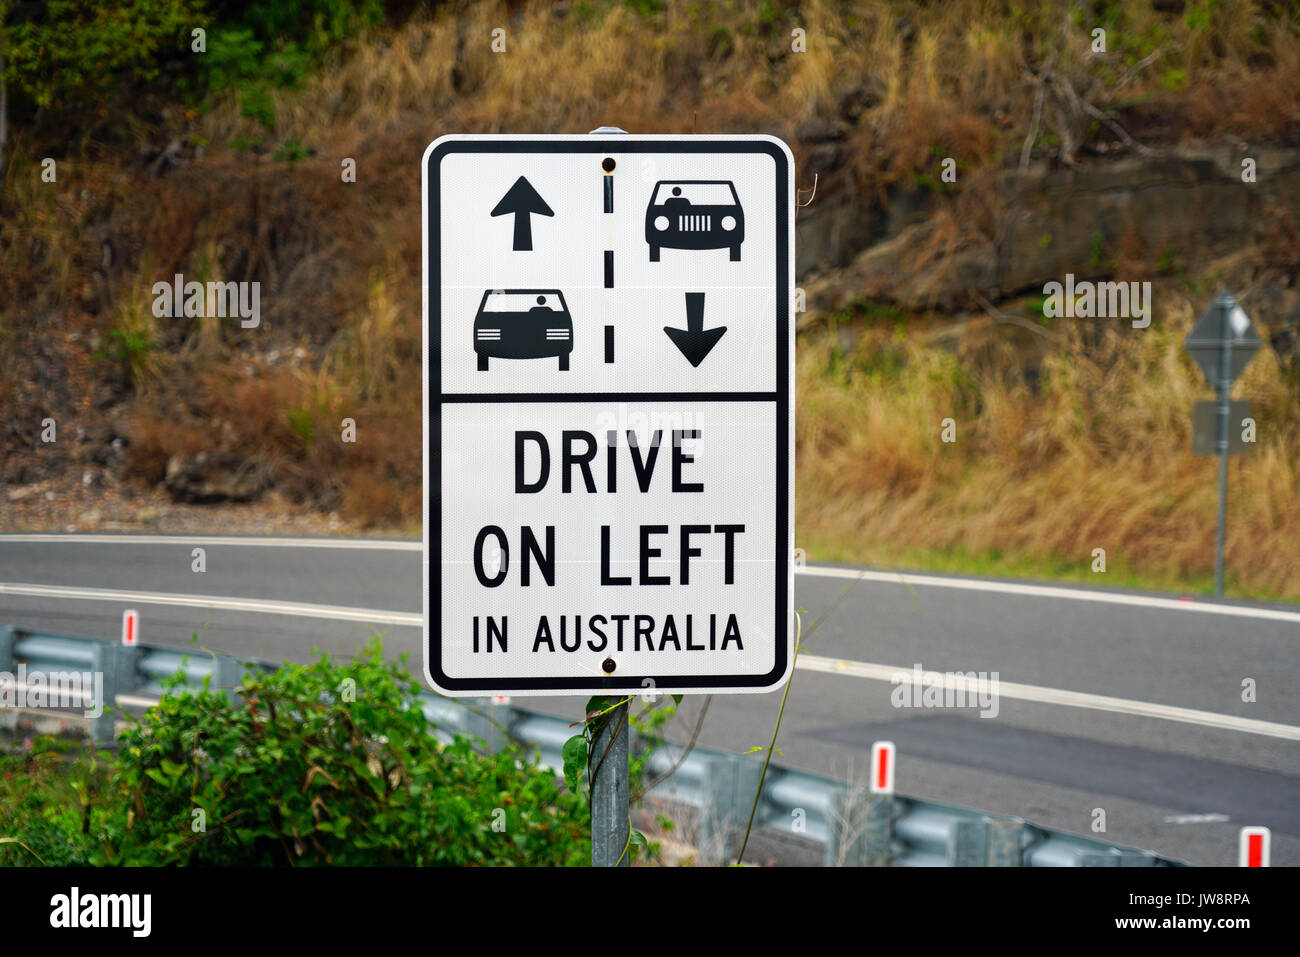 Road sign warning drivers to Drive on Left in Australia. Stock Photo